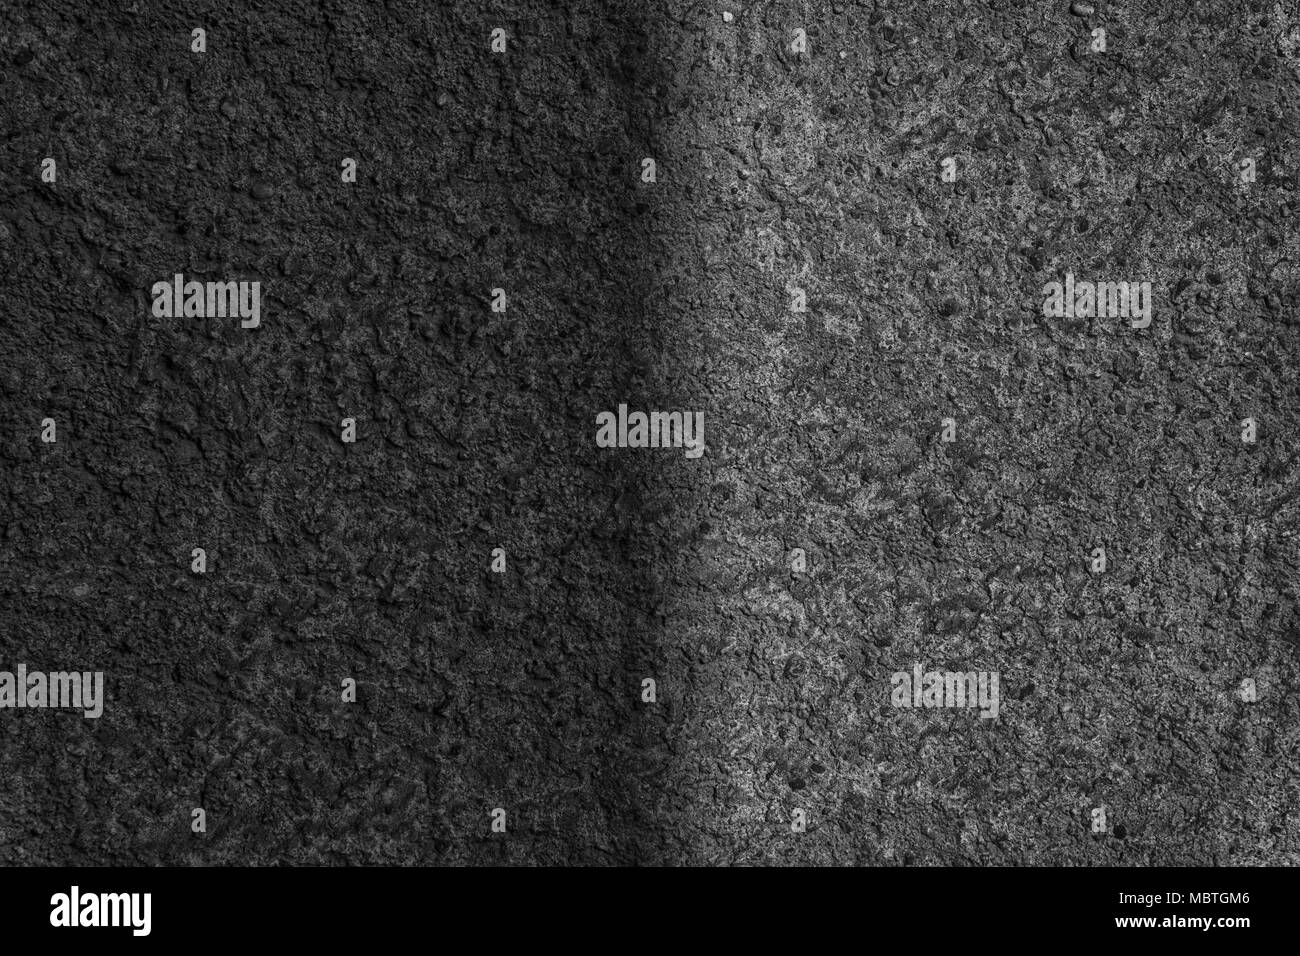 Old plaster texture with shadow, shade stone background for web site or mobile devices. Stock Photo